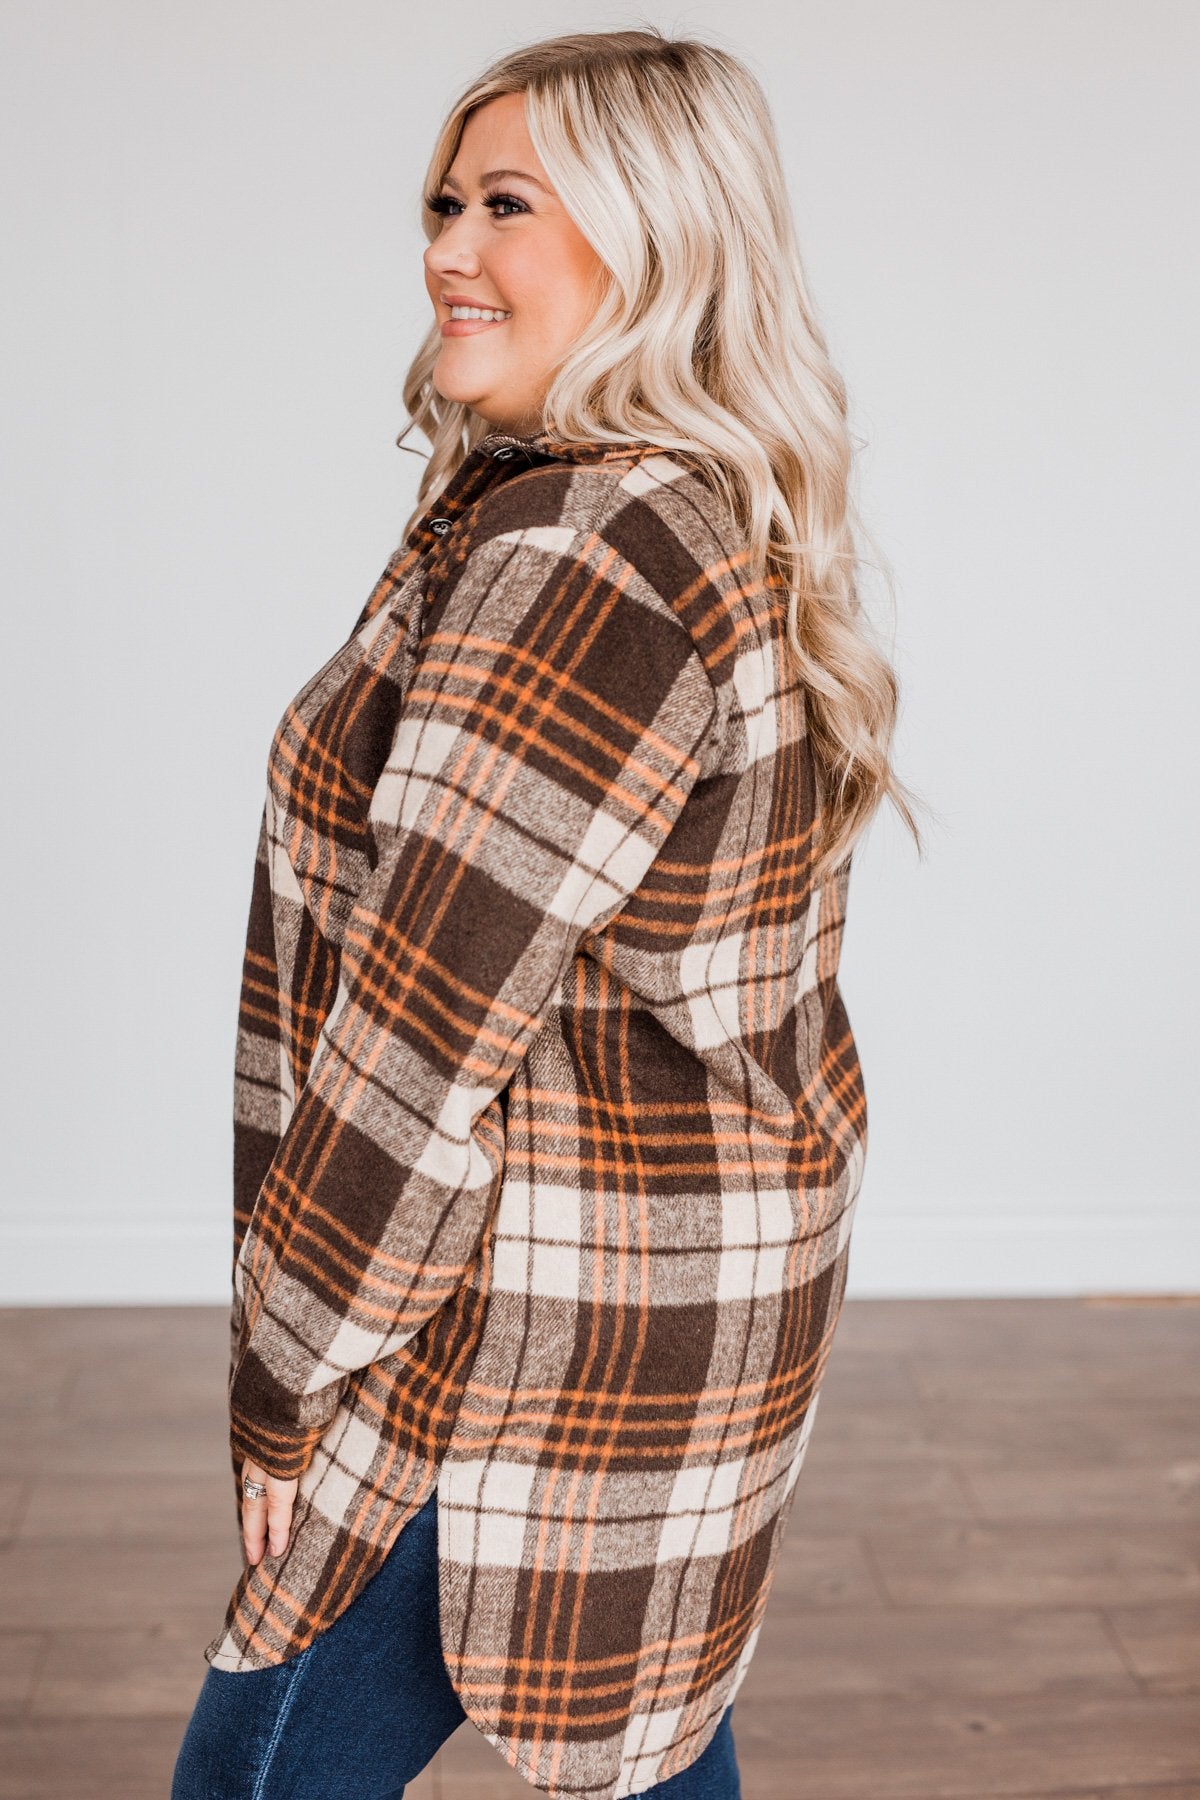 Time With You Plaid Top- Orange & Chocolate